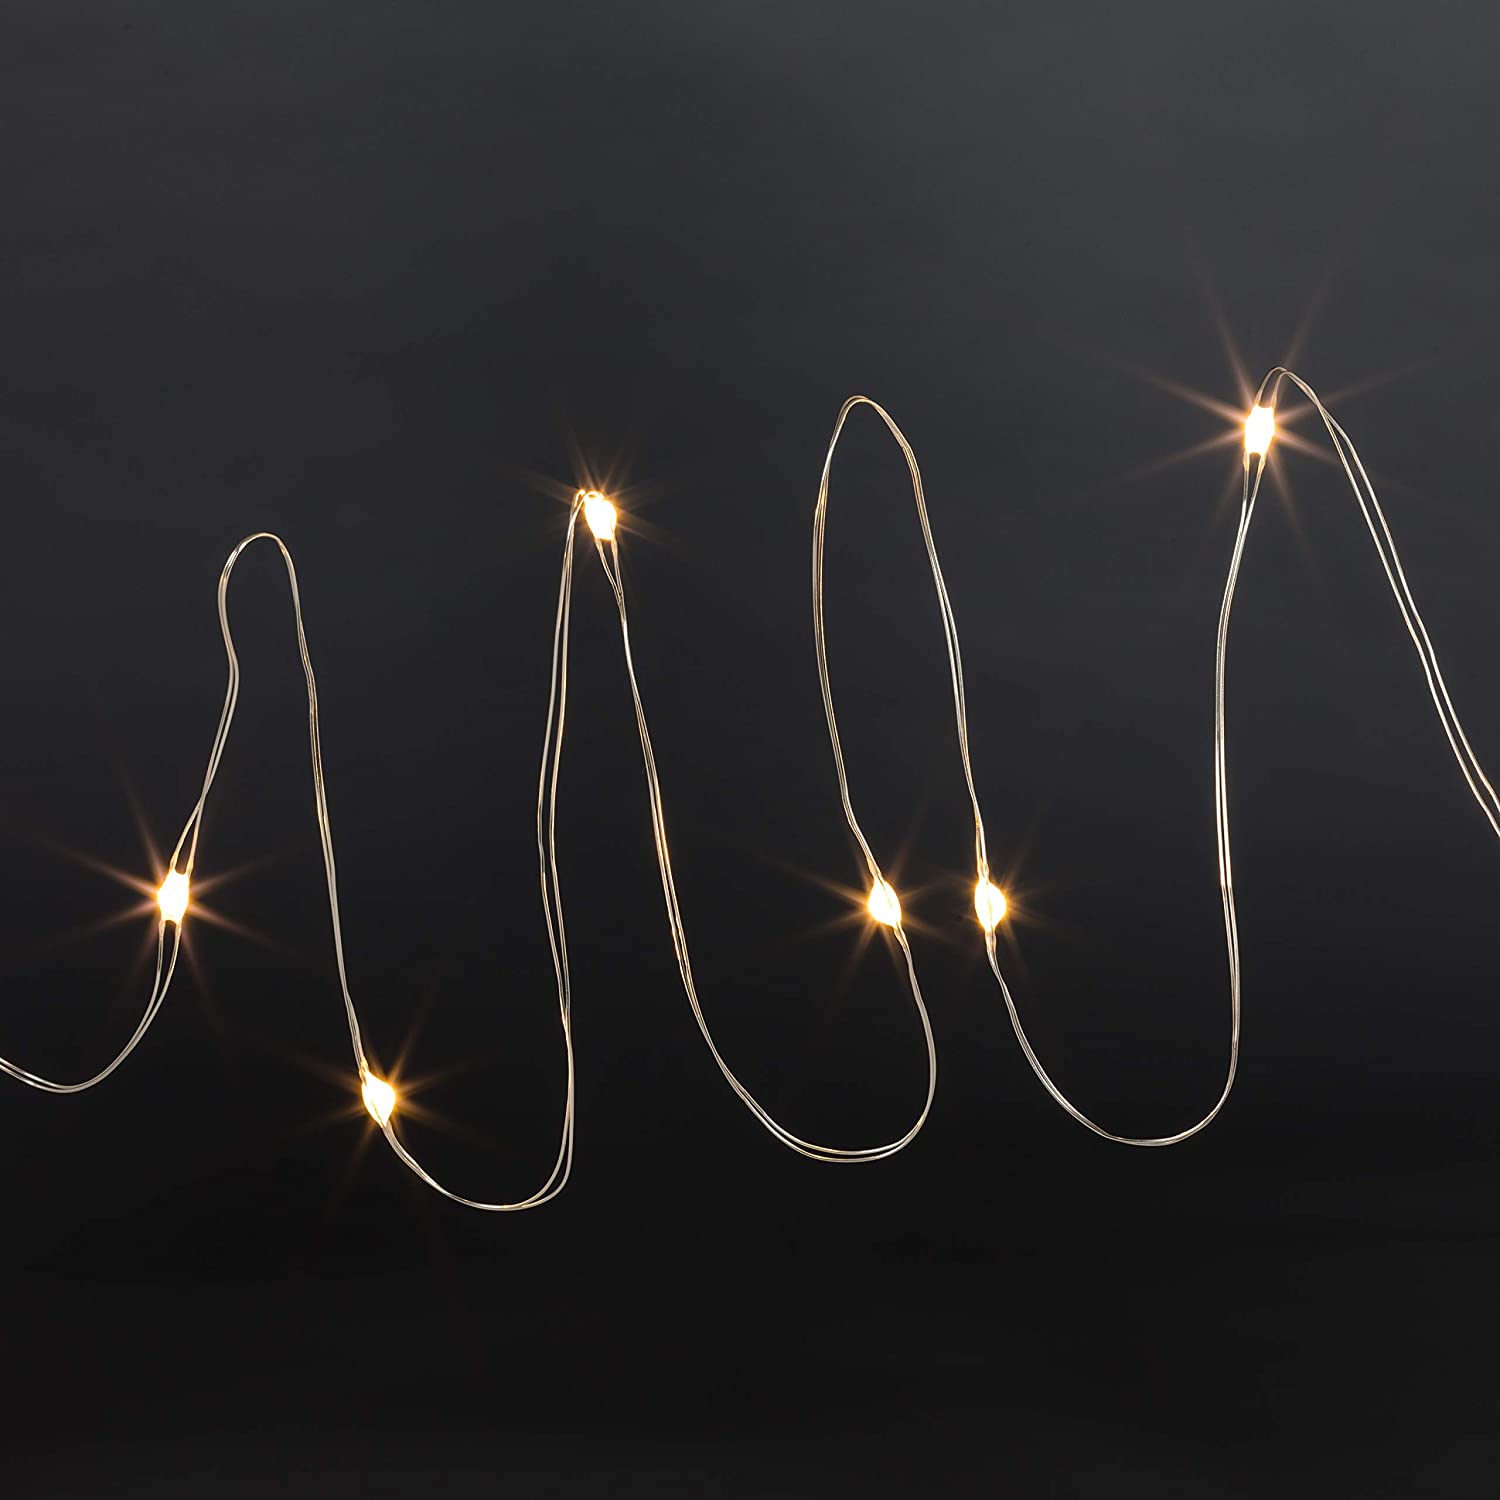 String Lights- 20 LED Twinkling Battery Operated